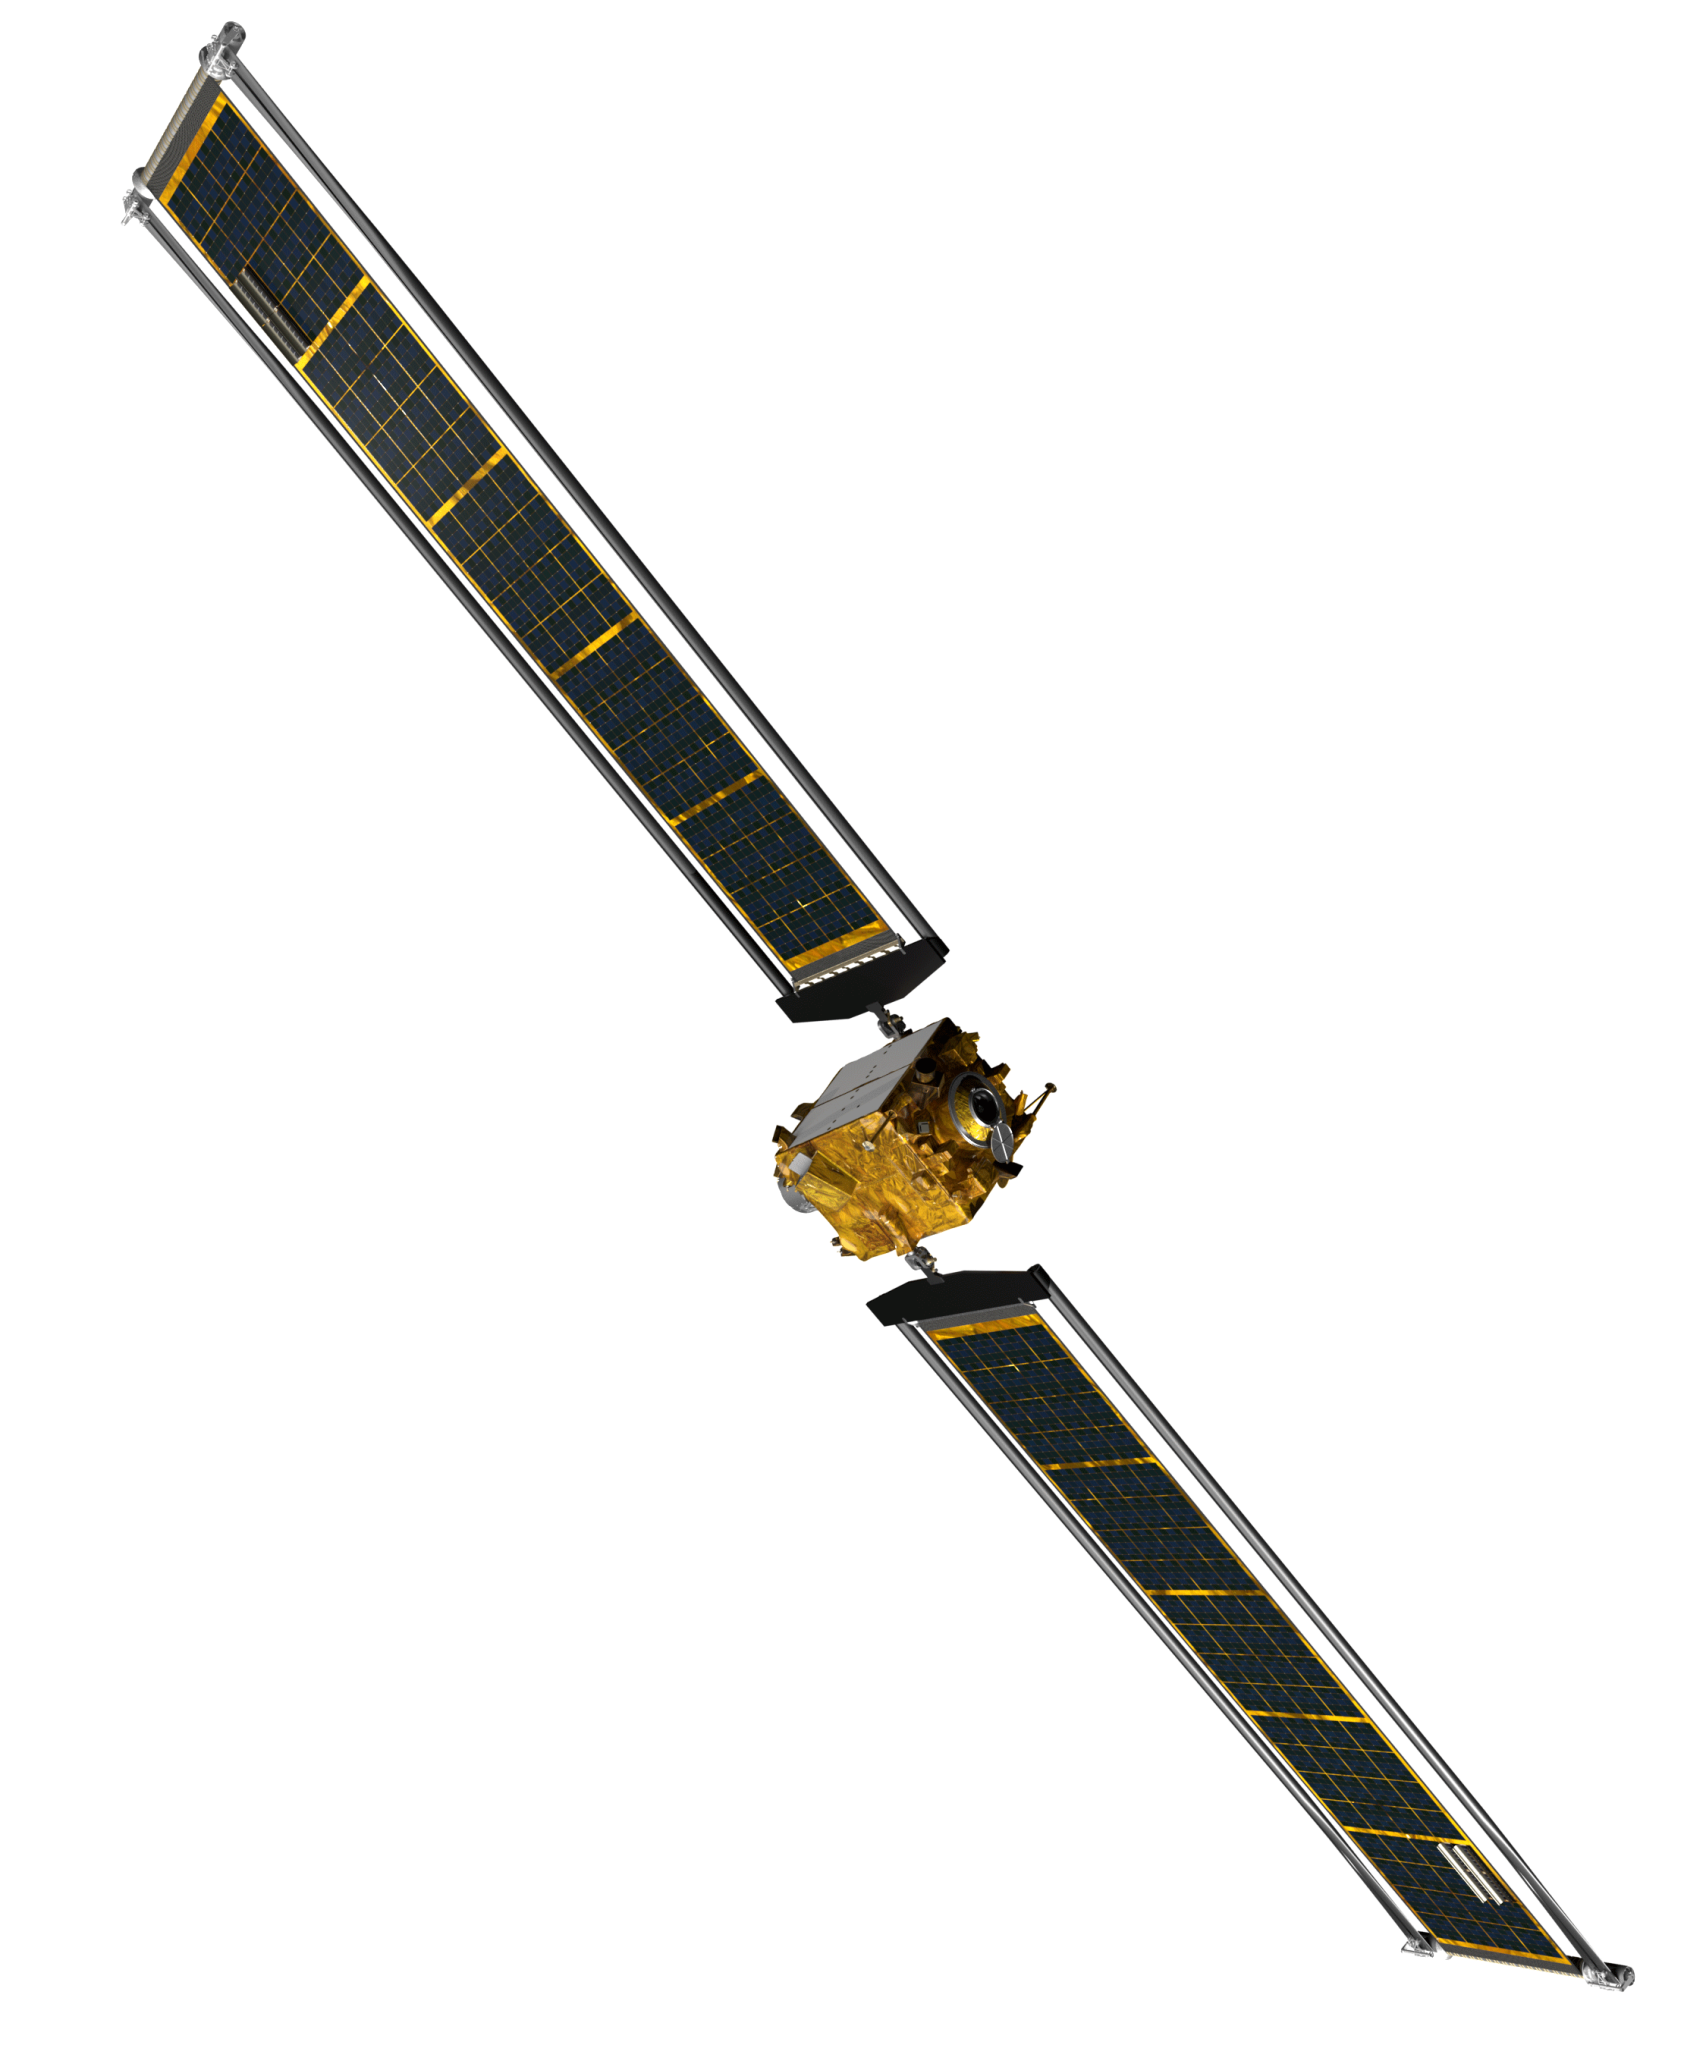 An illustration of the DART spacecraft.